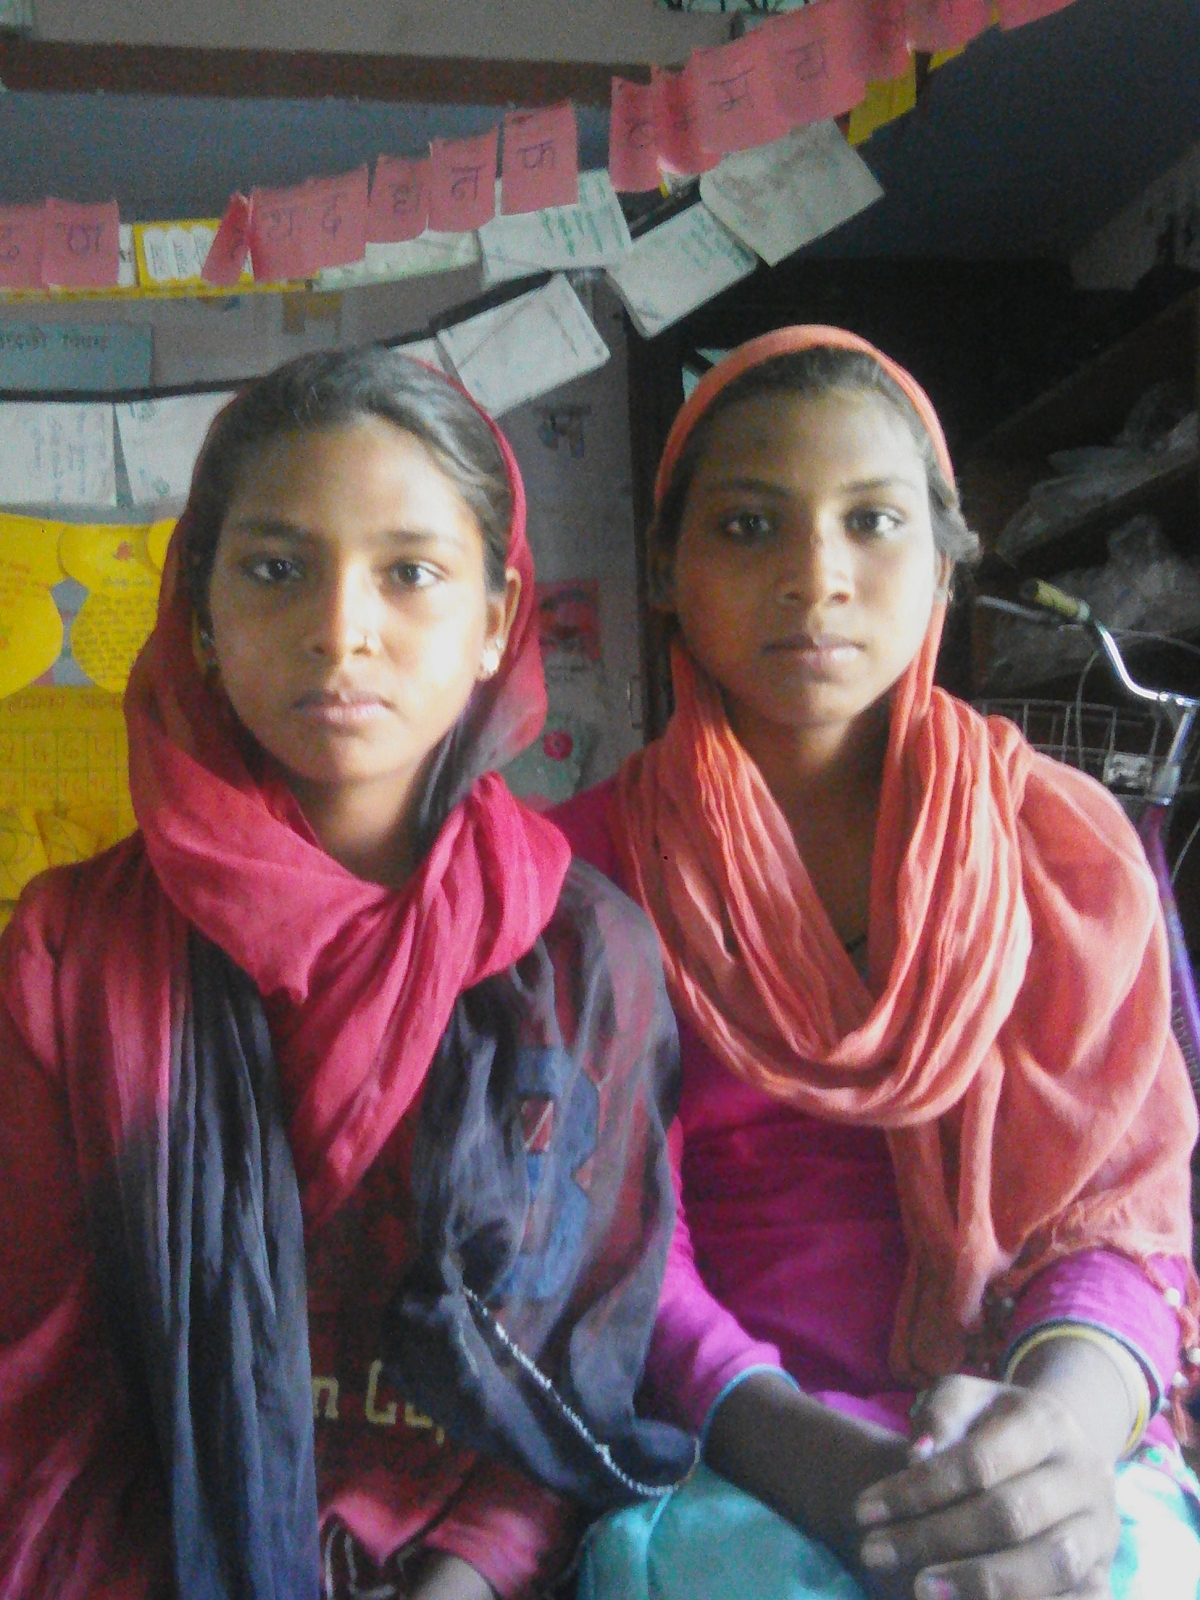 From garbage collection to knowledge collection! The story of two girls!